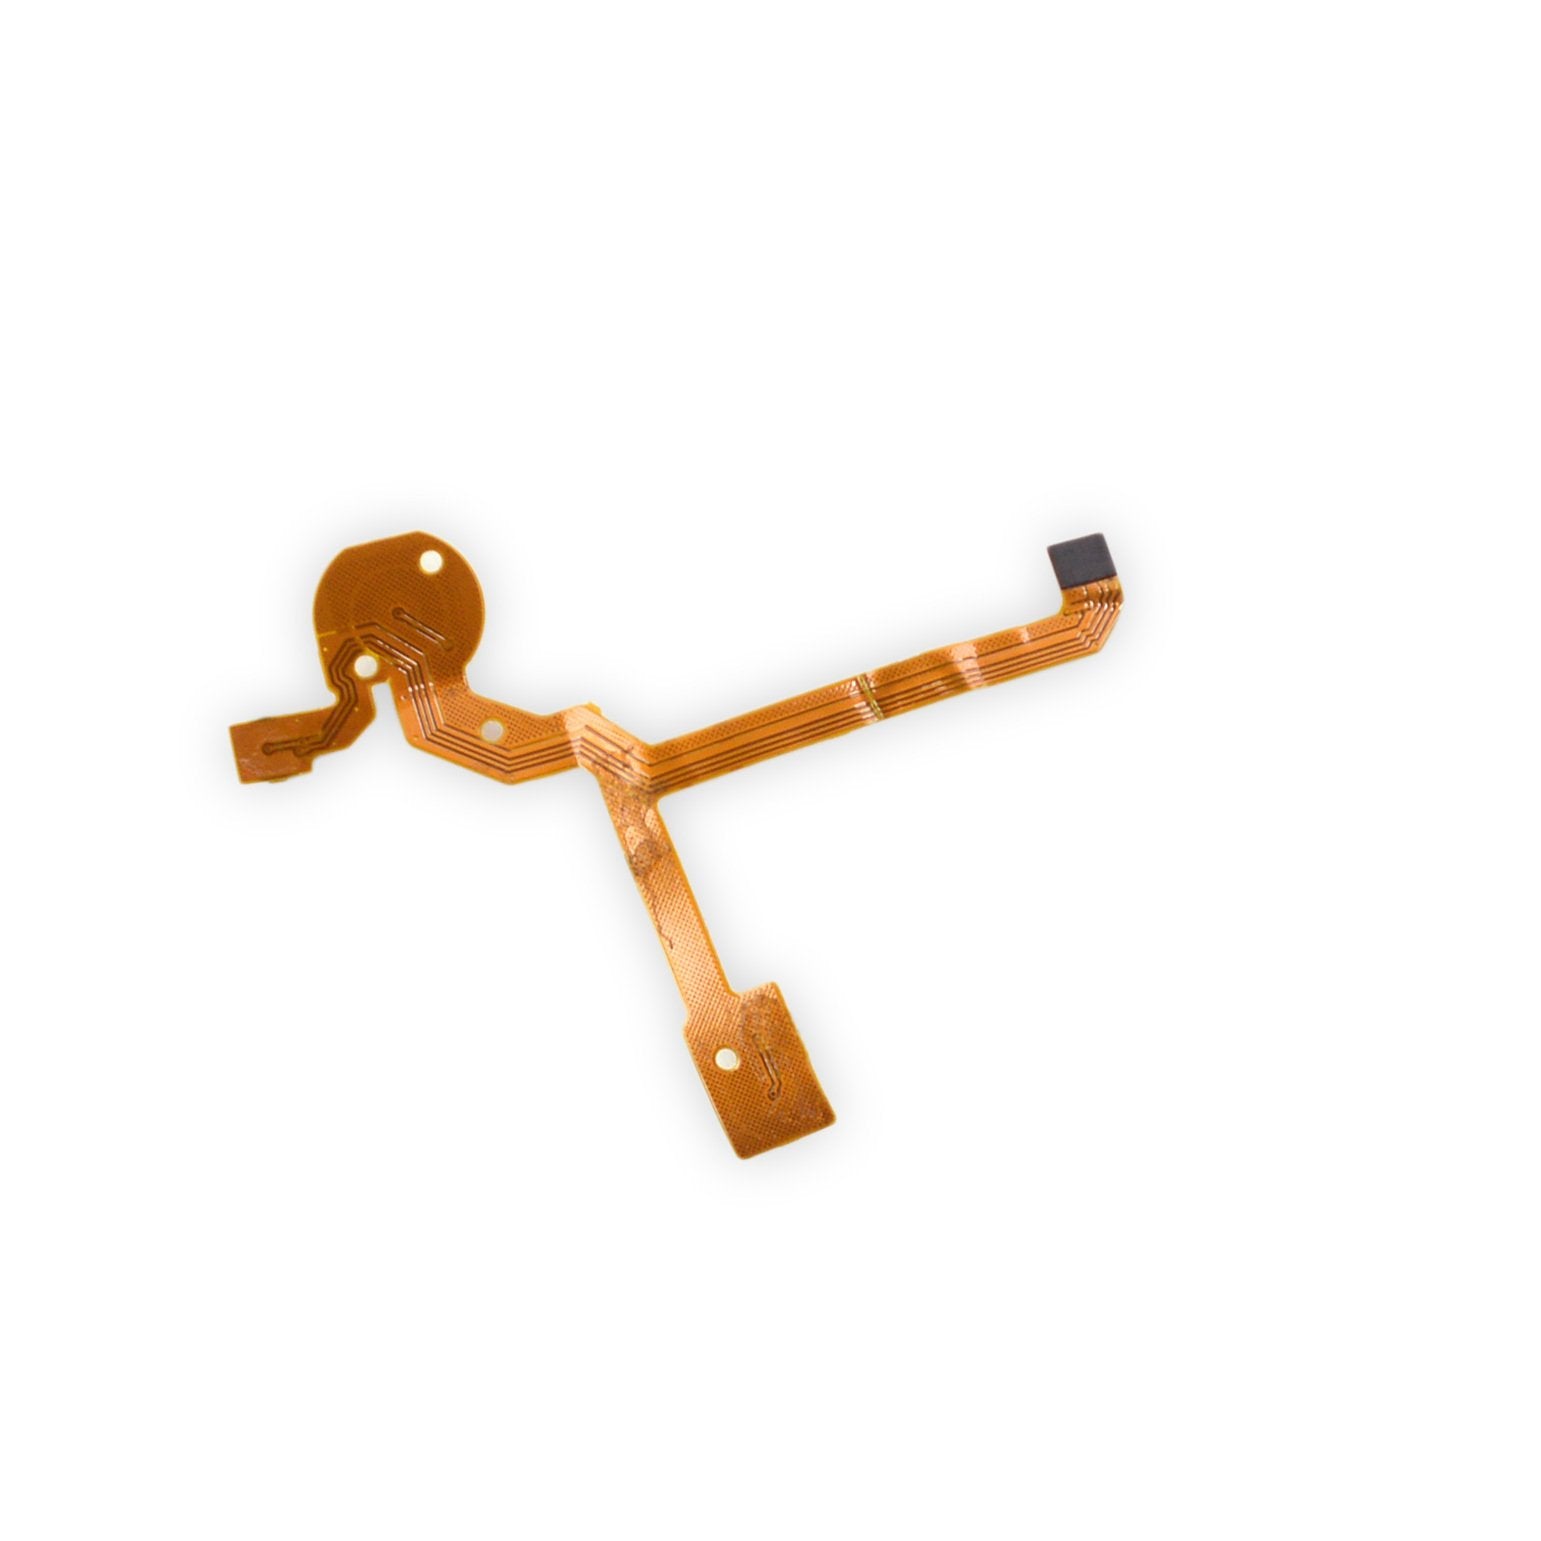 GoPro Hero3 Silver Shutter/Select and Wi-Fi Button Flex Cable